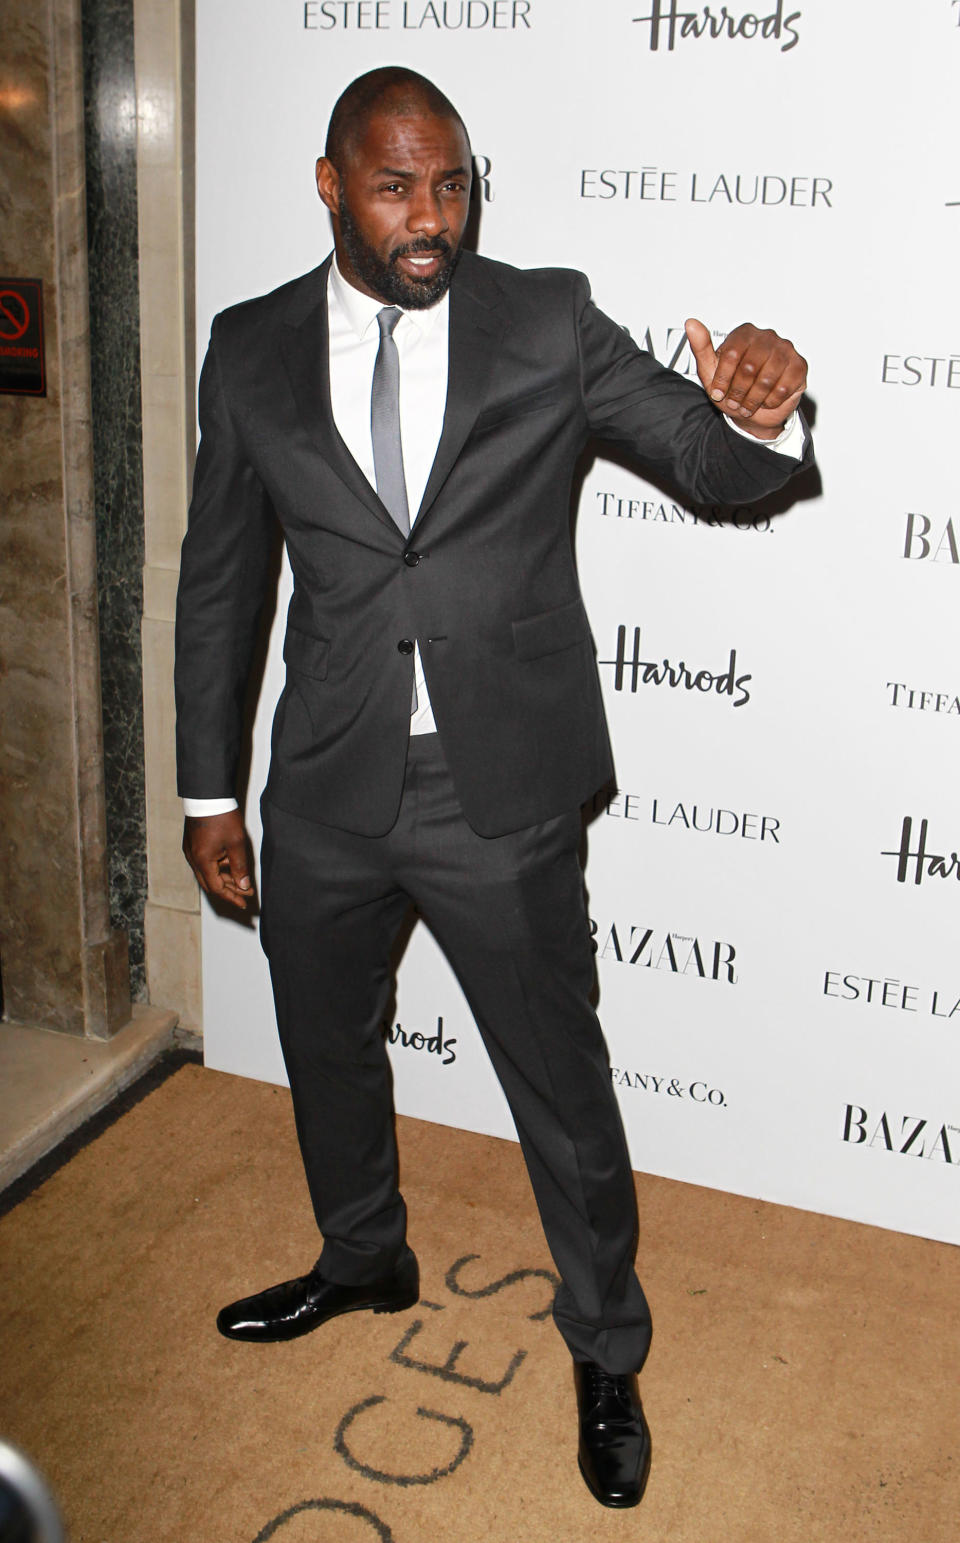 LONDON, UNITED KINGDOM - OCTOBER 31: Idris Elba attends the Harper's Bazaar Woman of the Year Awards at Claridge's Hotel on October 31, 2012 in London, England. (Photo by Fred Duval/Getty Images)